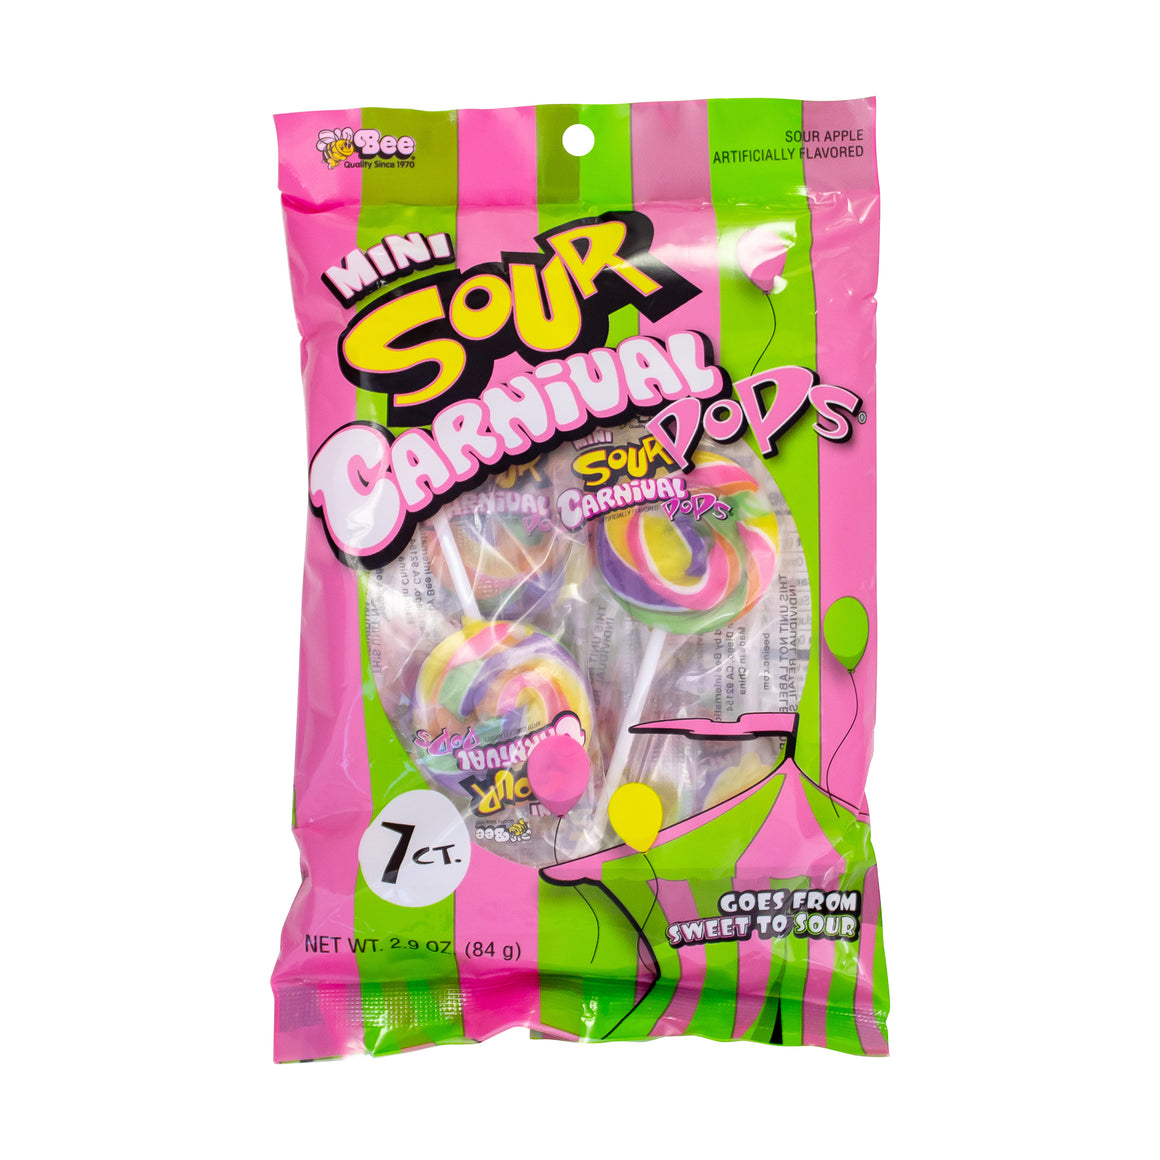 All City Candy Bee Mini Carnival SOUR Pops 7 Count Bag Bee International Candy For fresh candy and great service, visit www.allcitycandy.com